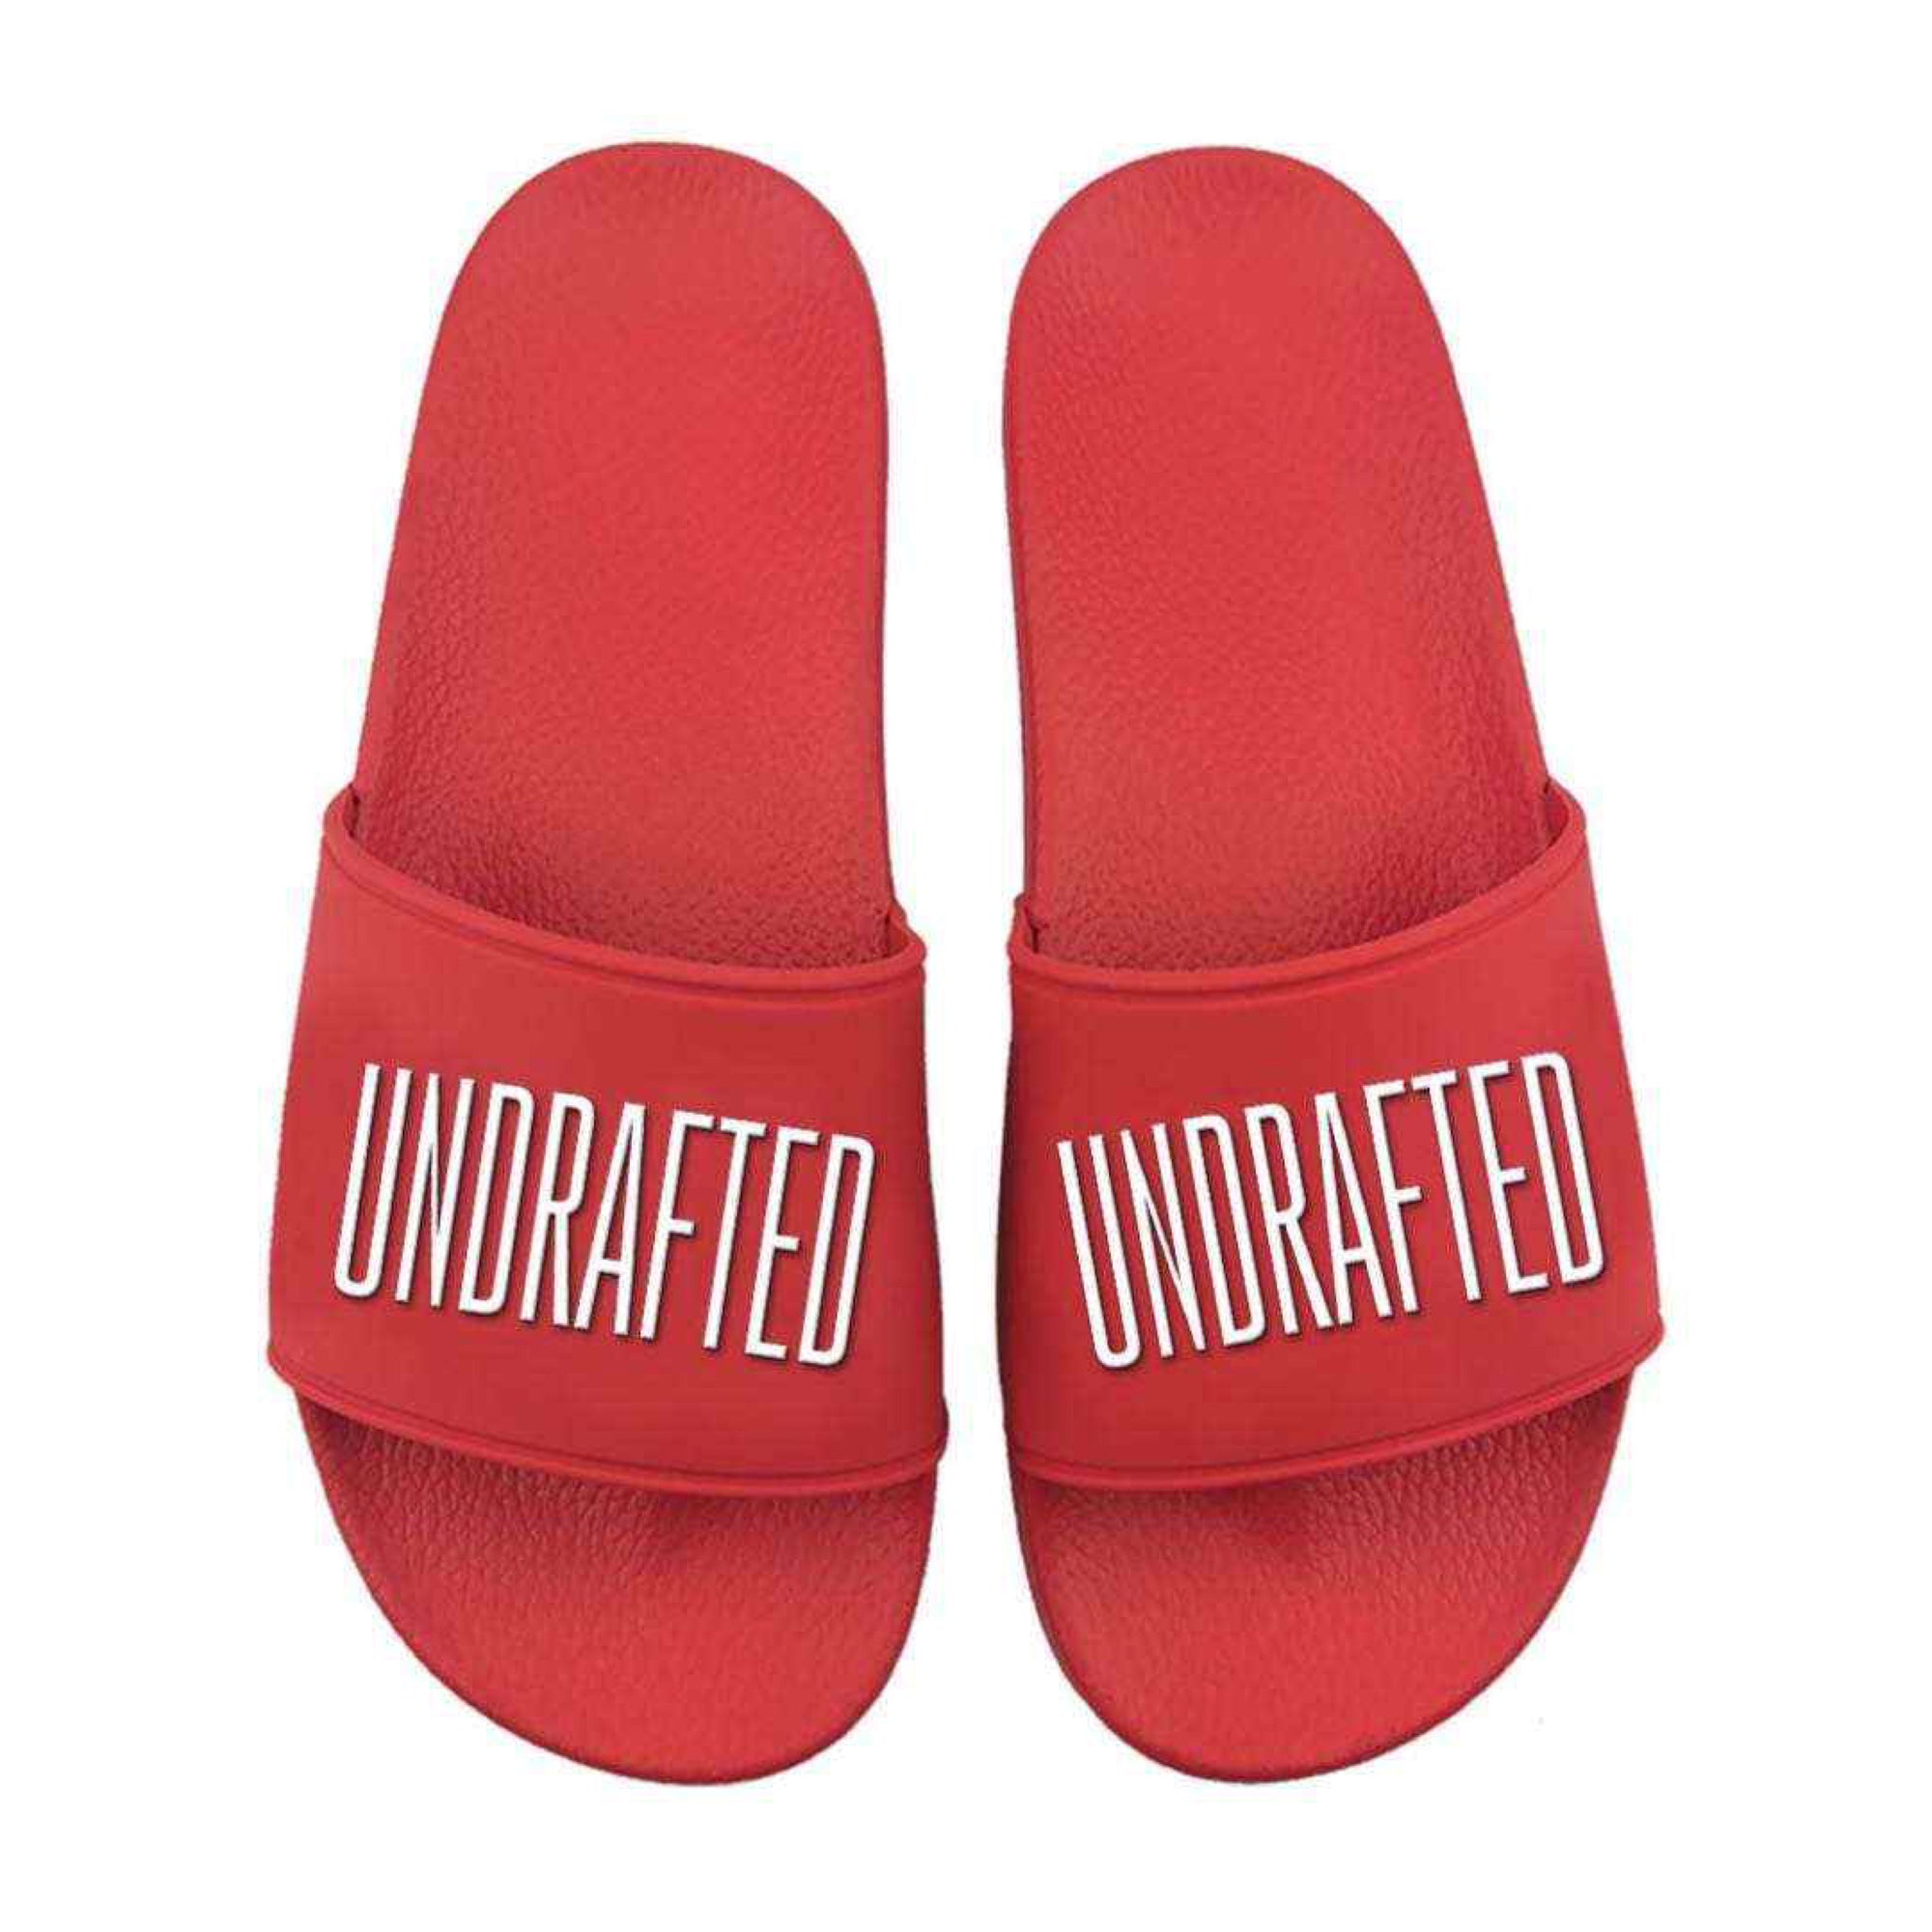 Undrafted Slides - Red